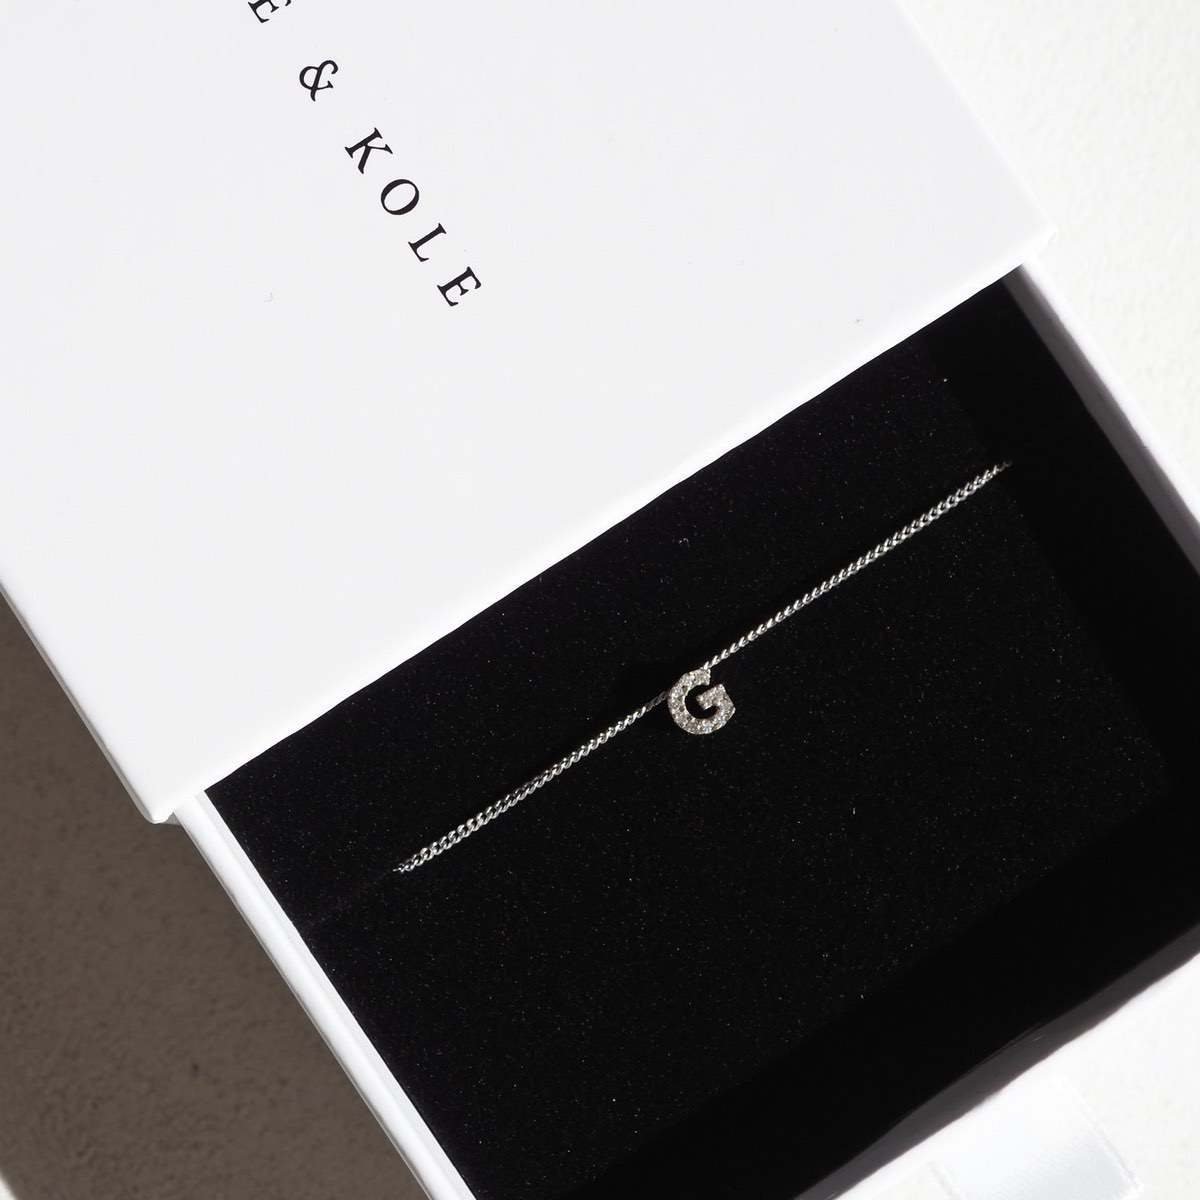 High quality, hand-finished jewellery: A Sterling Silver Diamond Letter Charm Necklace sitting beautifully in a white K&K gift box